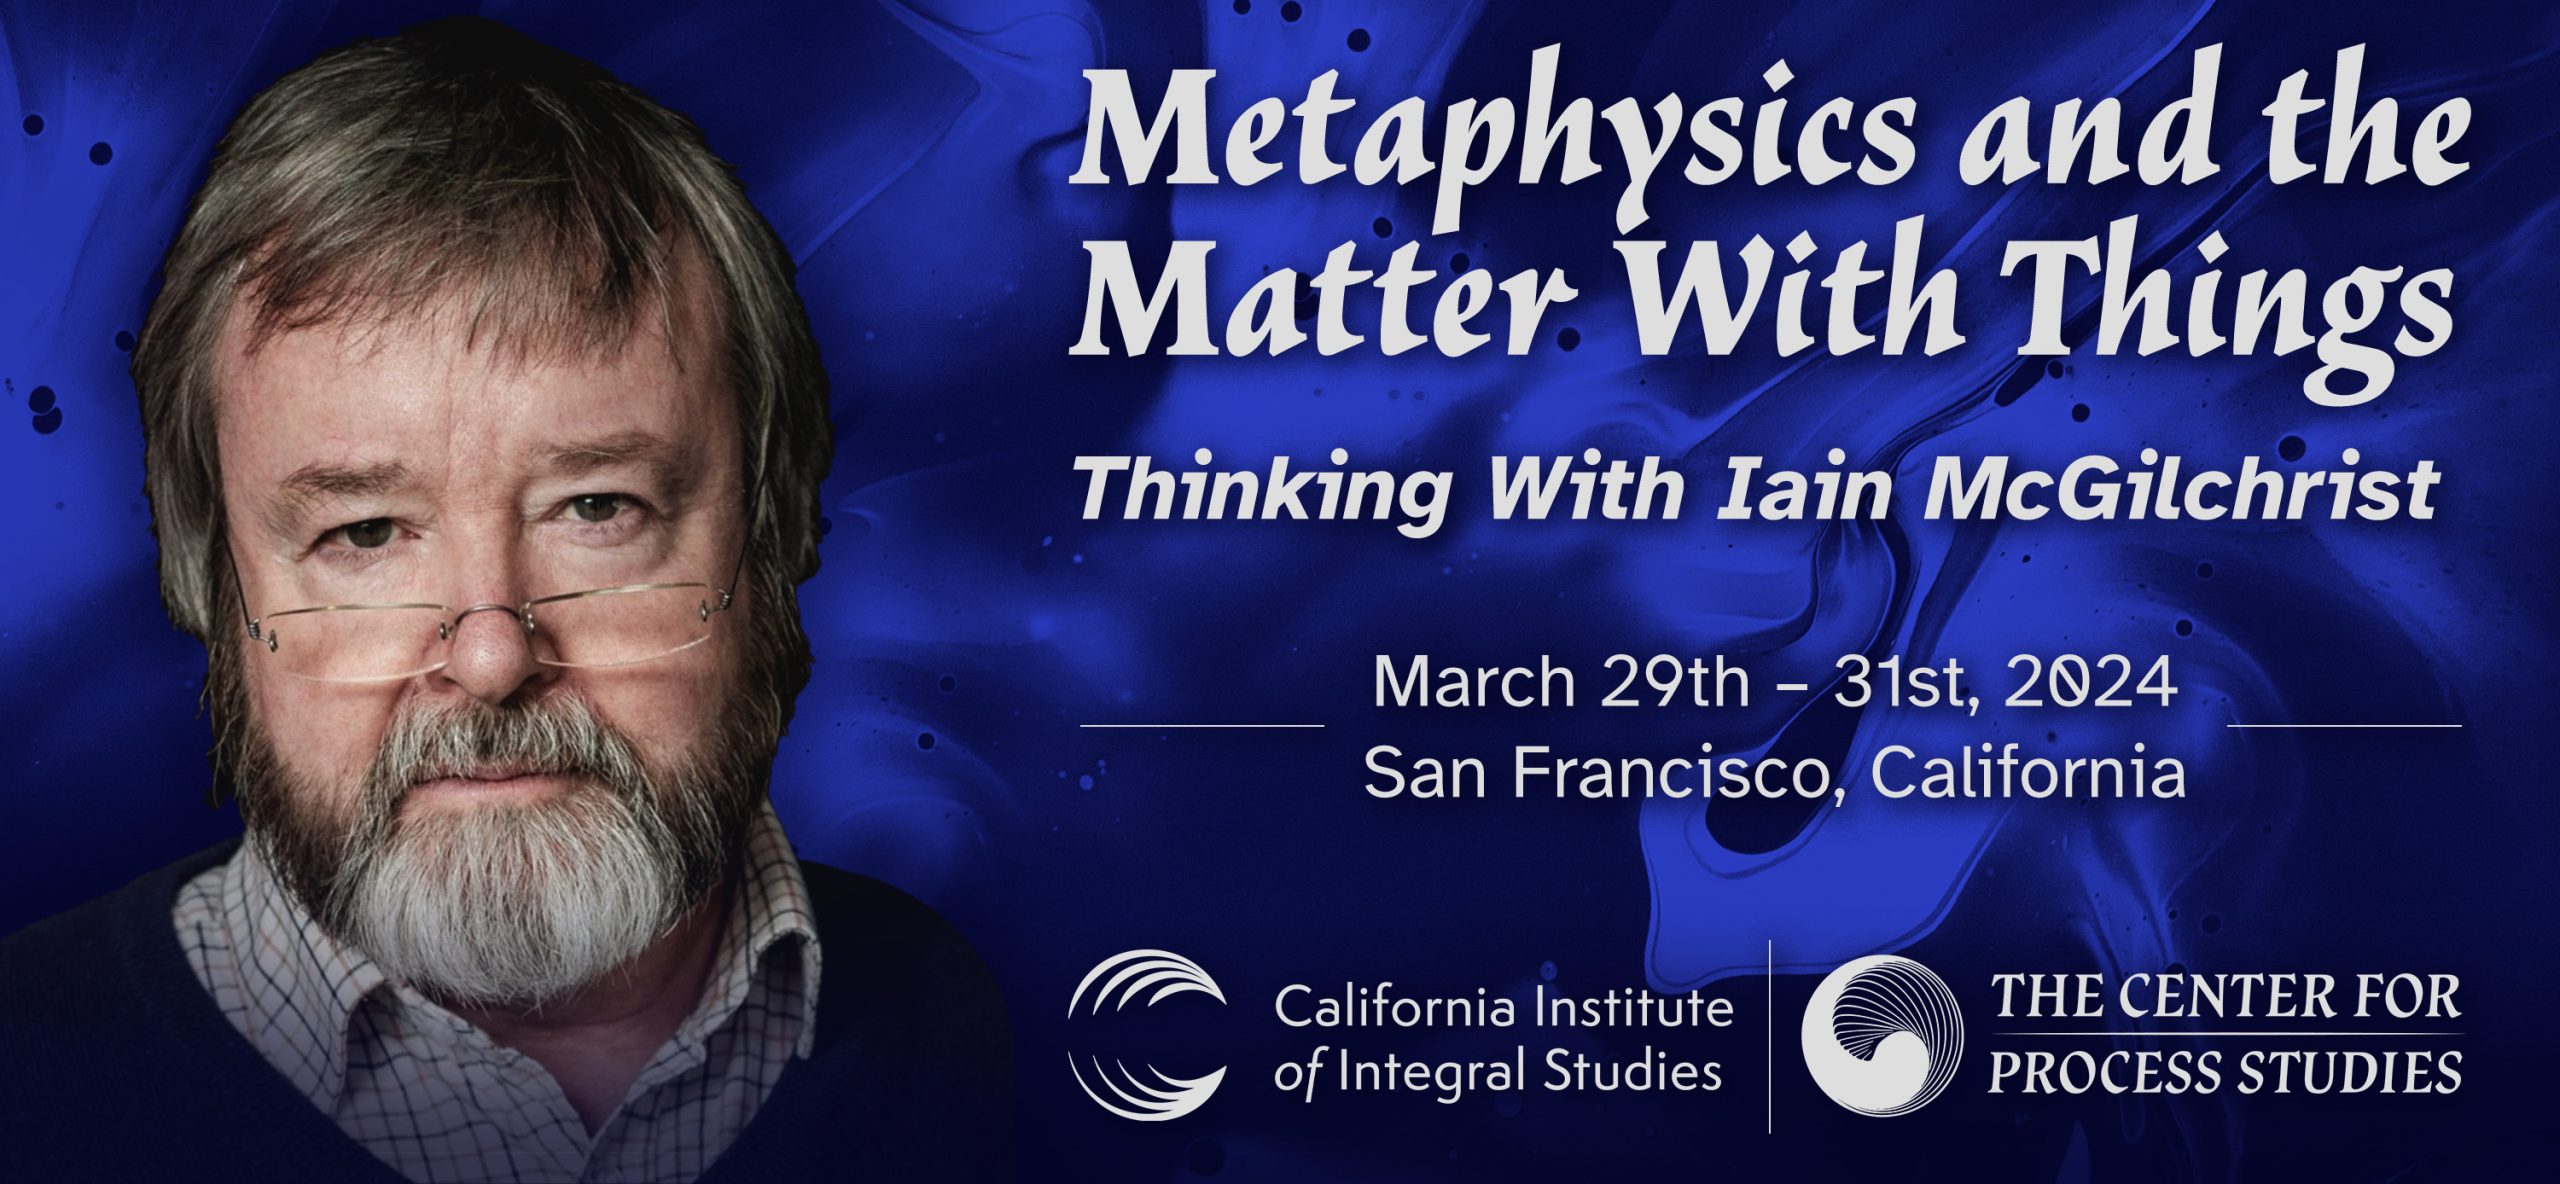 Metaphysics and the Matter with Things: Thinking with Iain McGilchrist Conference